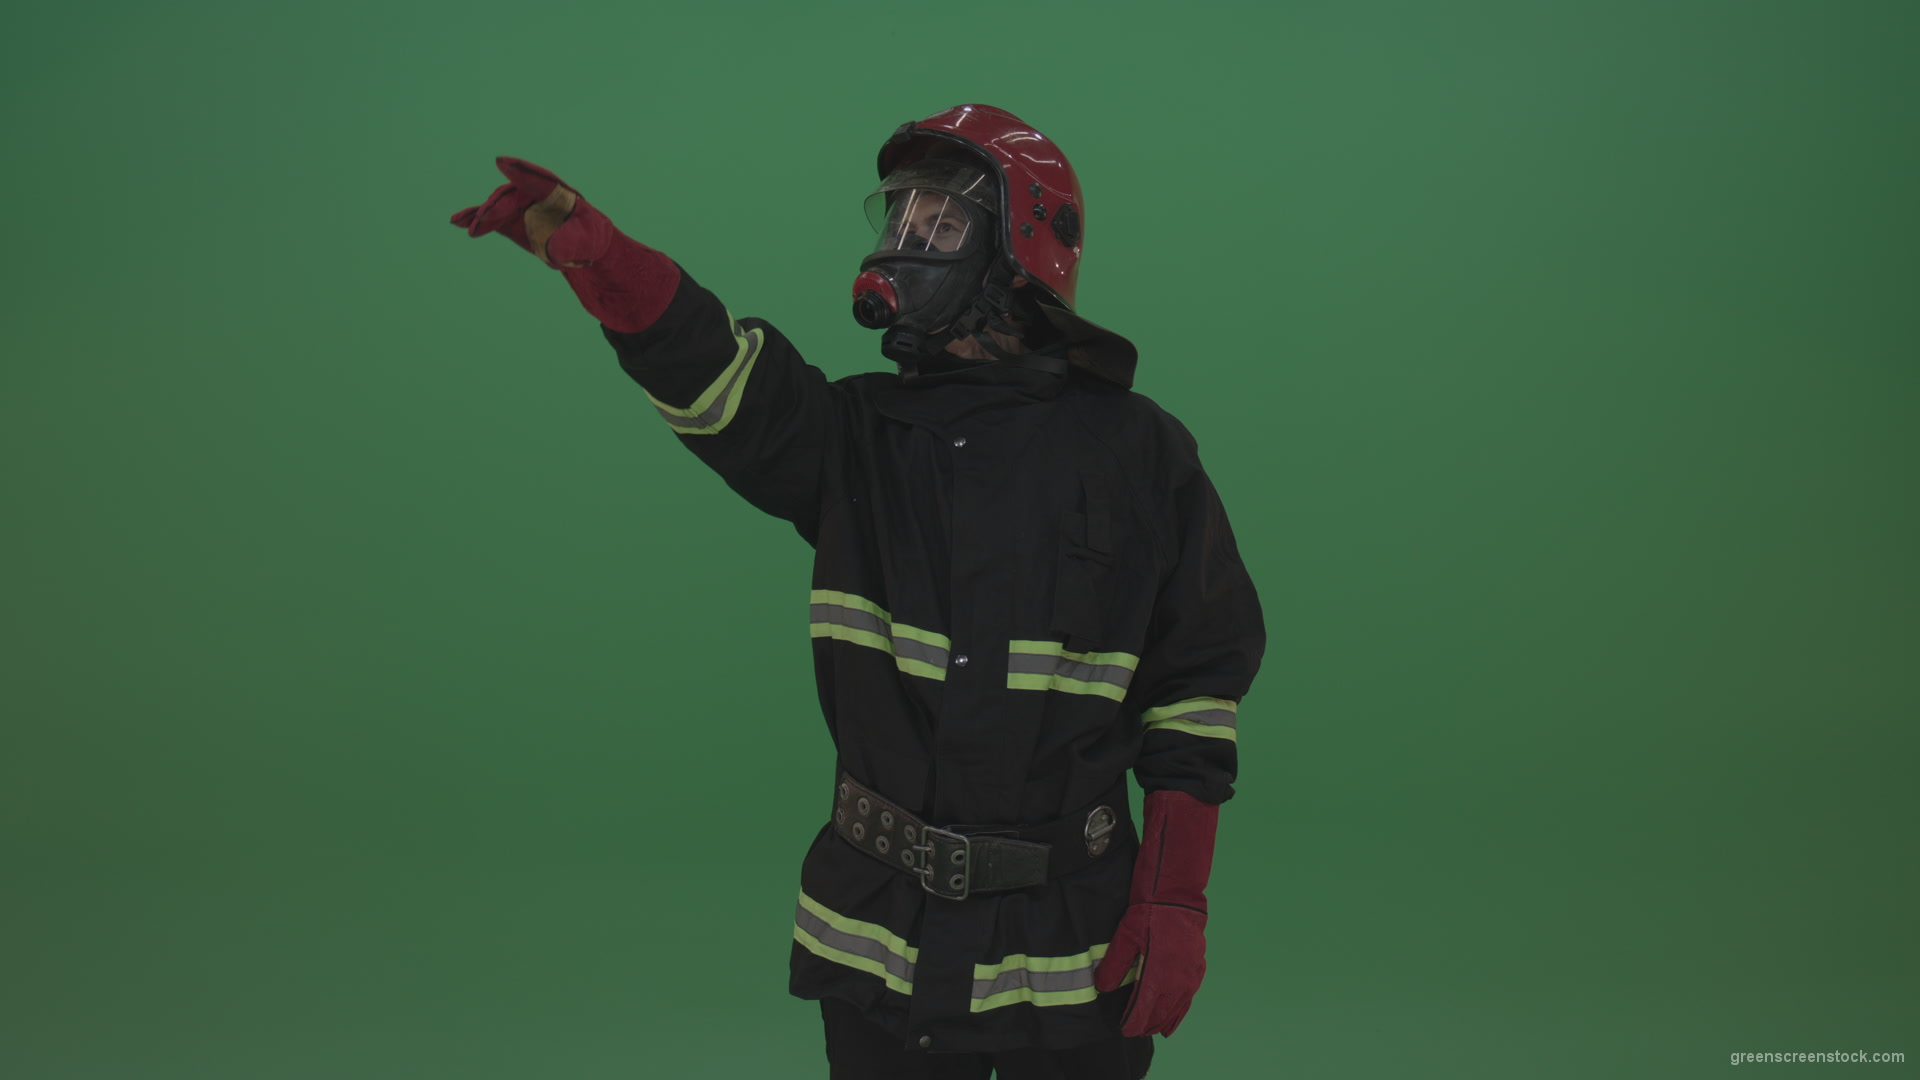 Young_Fireman_Points_Left_And_Right_At_Something_He_Noticed_On_Green_Screen_Chroma_Key_Wall_Background_006 Green Screen Stock